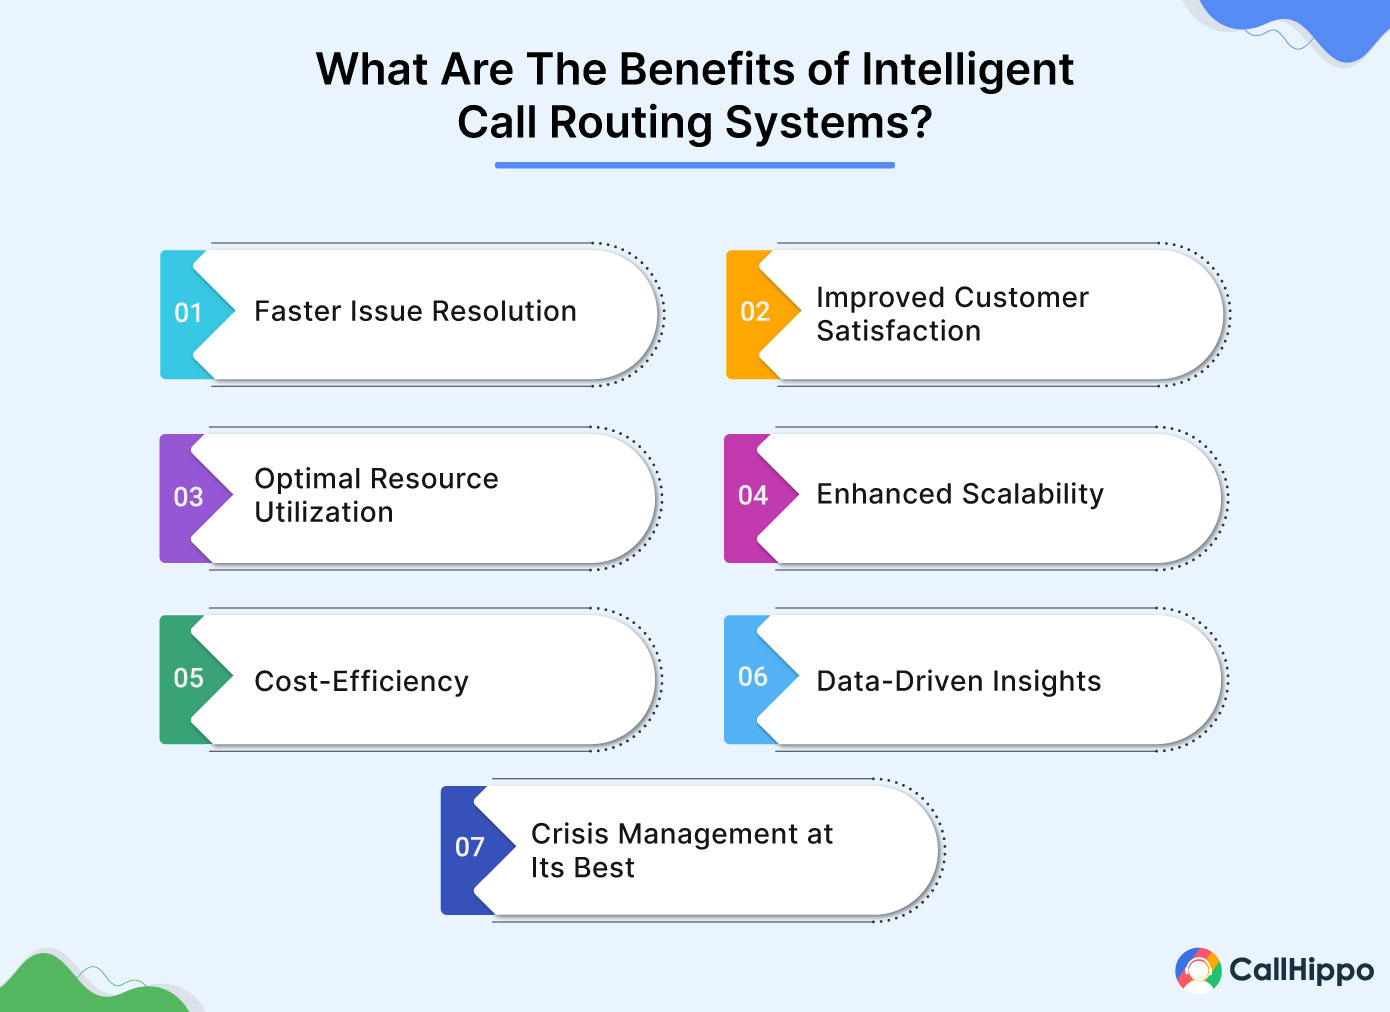 Benefits of intelligent call routing